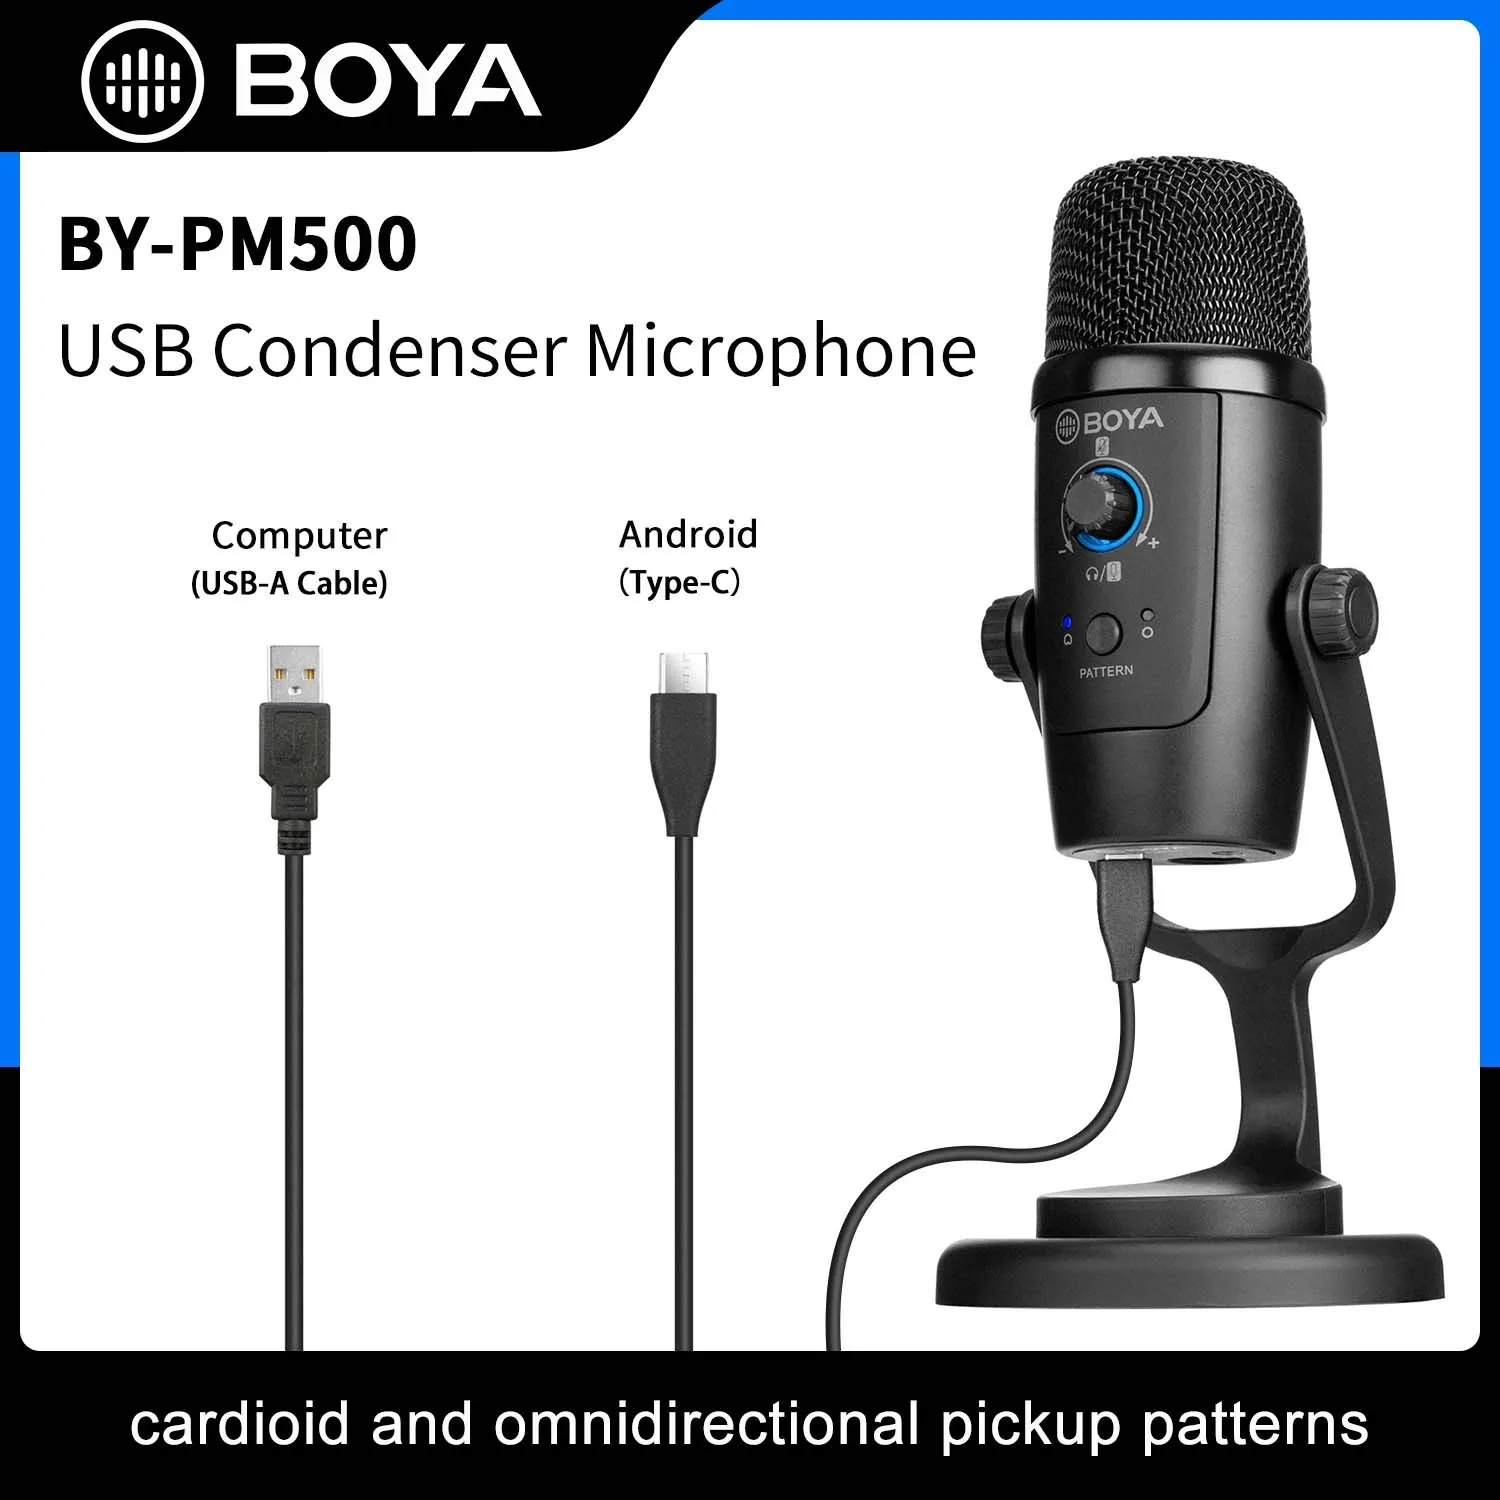 Boya By-pm500 Usb Microphone Compatible With Computers Usb Port And Type-c  Smartphone For Podcasting, Video Conference Calls - Microphones - AliExpress